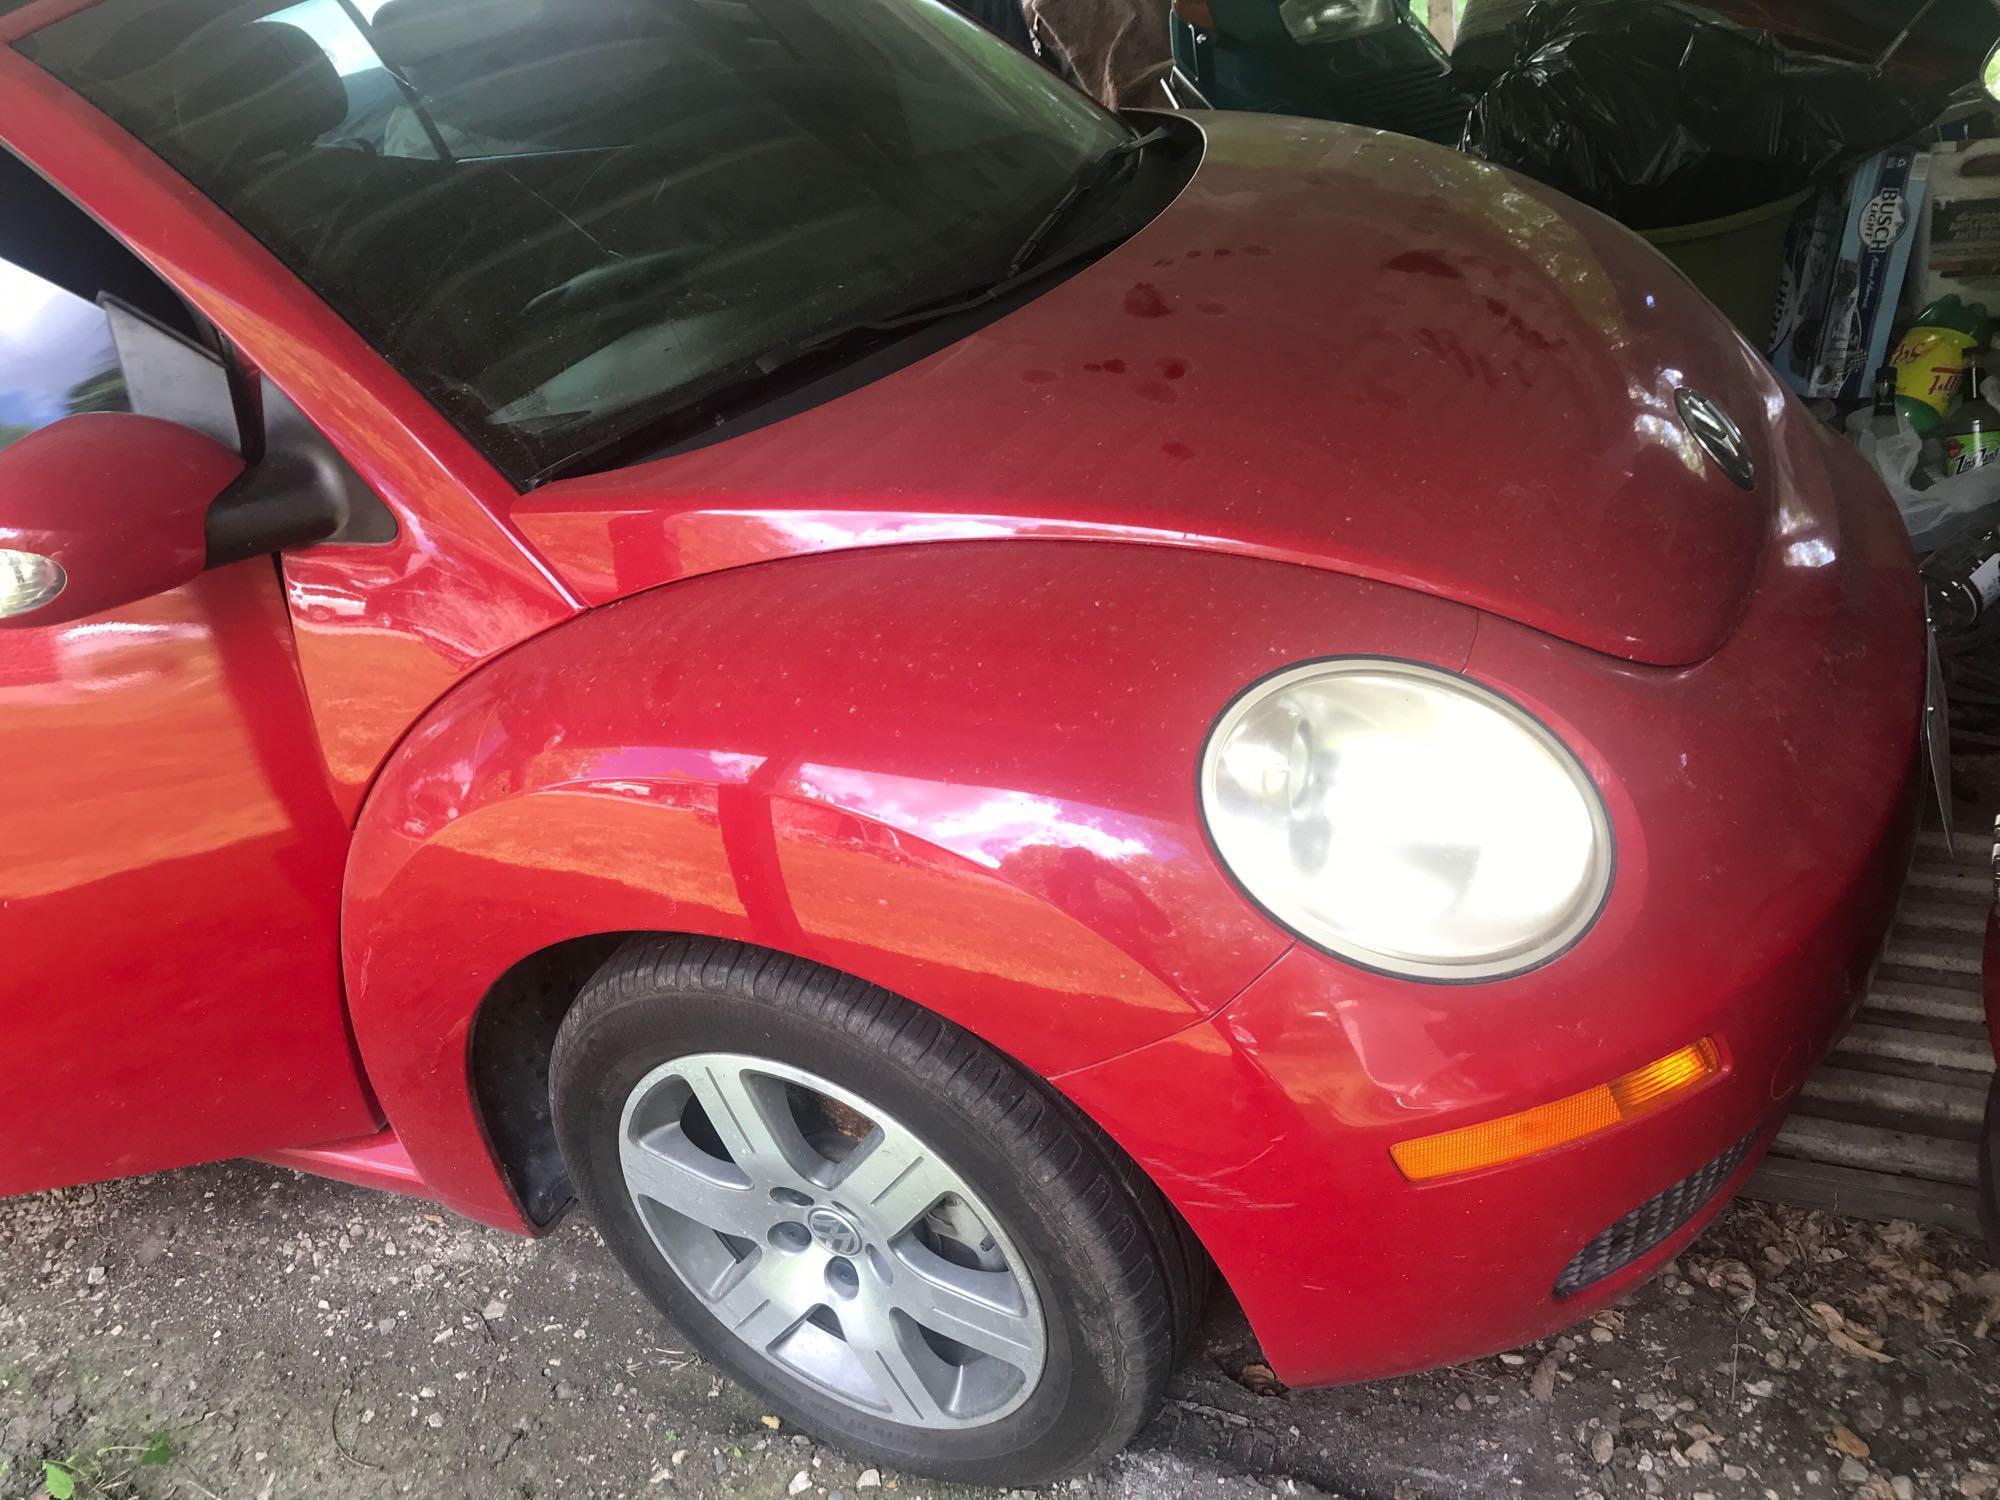 2006 VW Bettle Convertible, 2 dr, red, black leather, auto